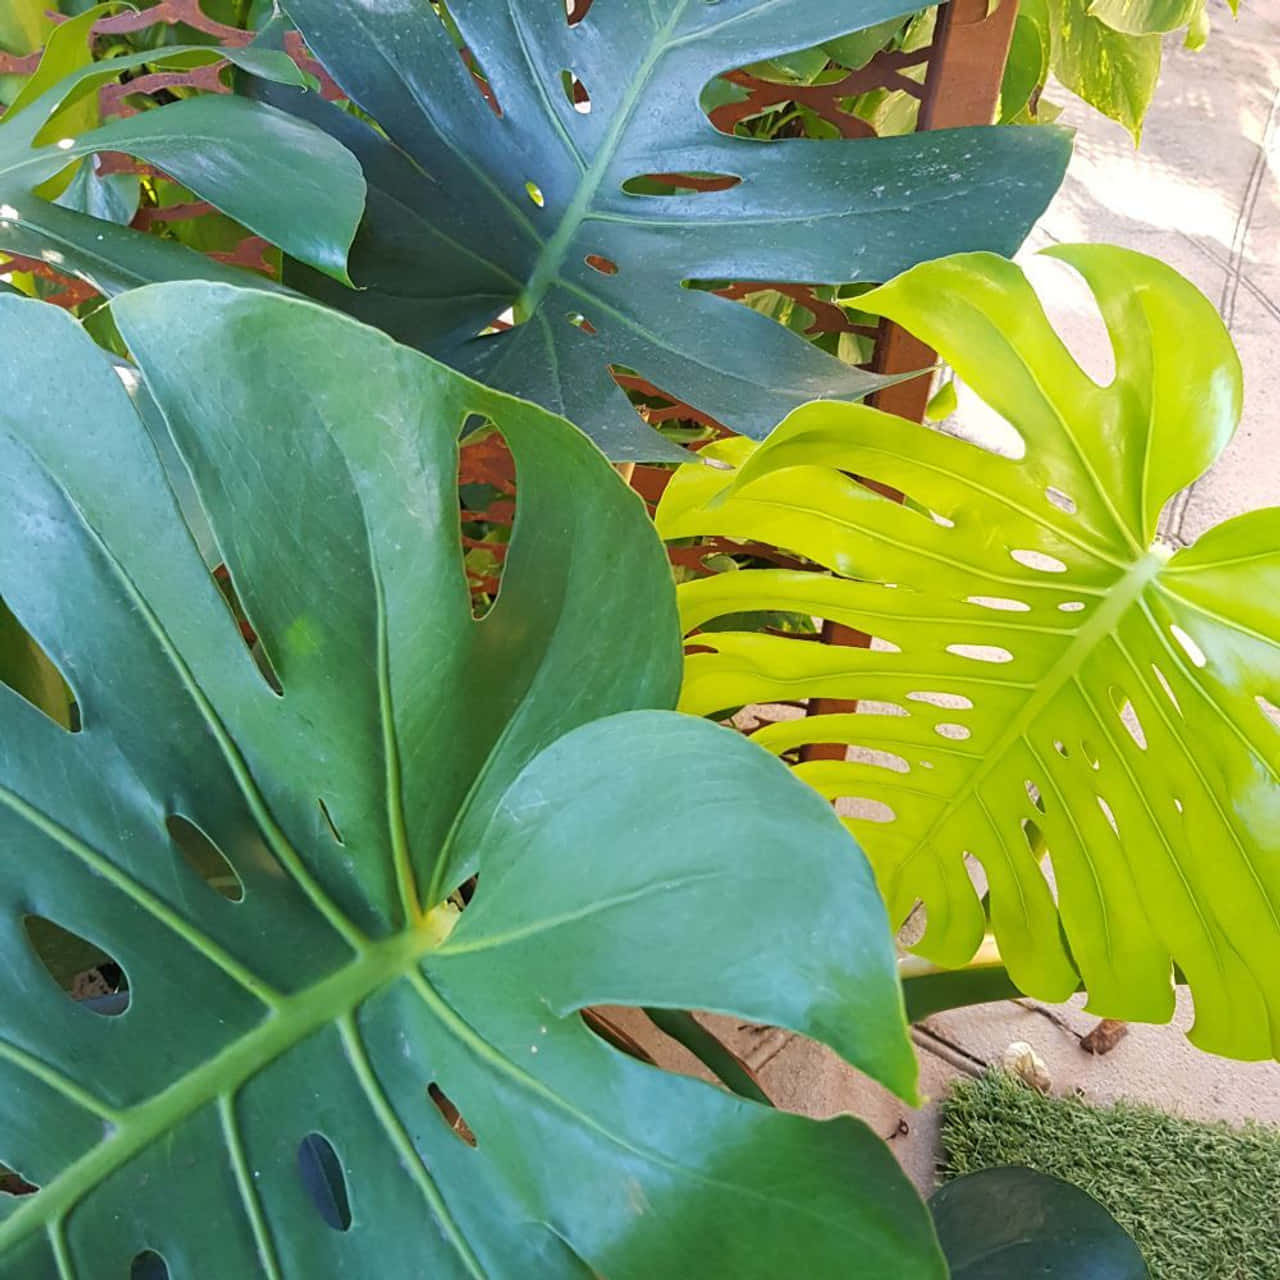 Bring Nature's beauty into your home with a vibrant green Monstera leaf.